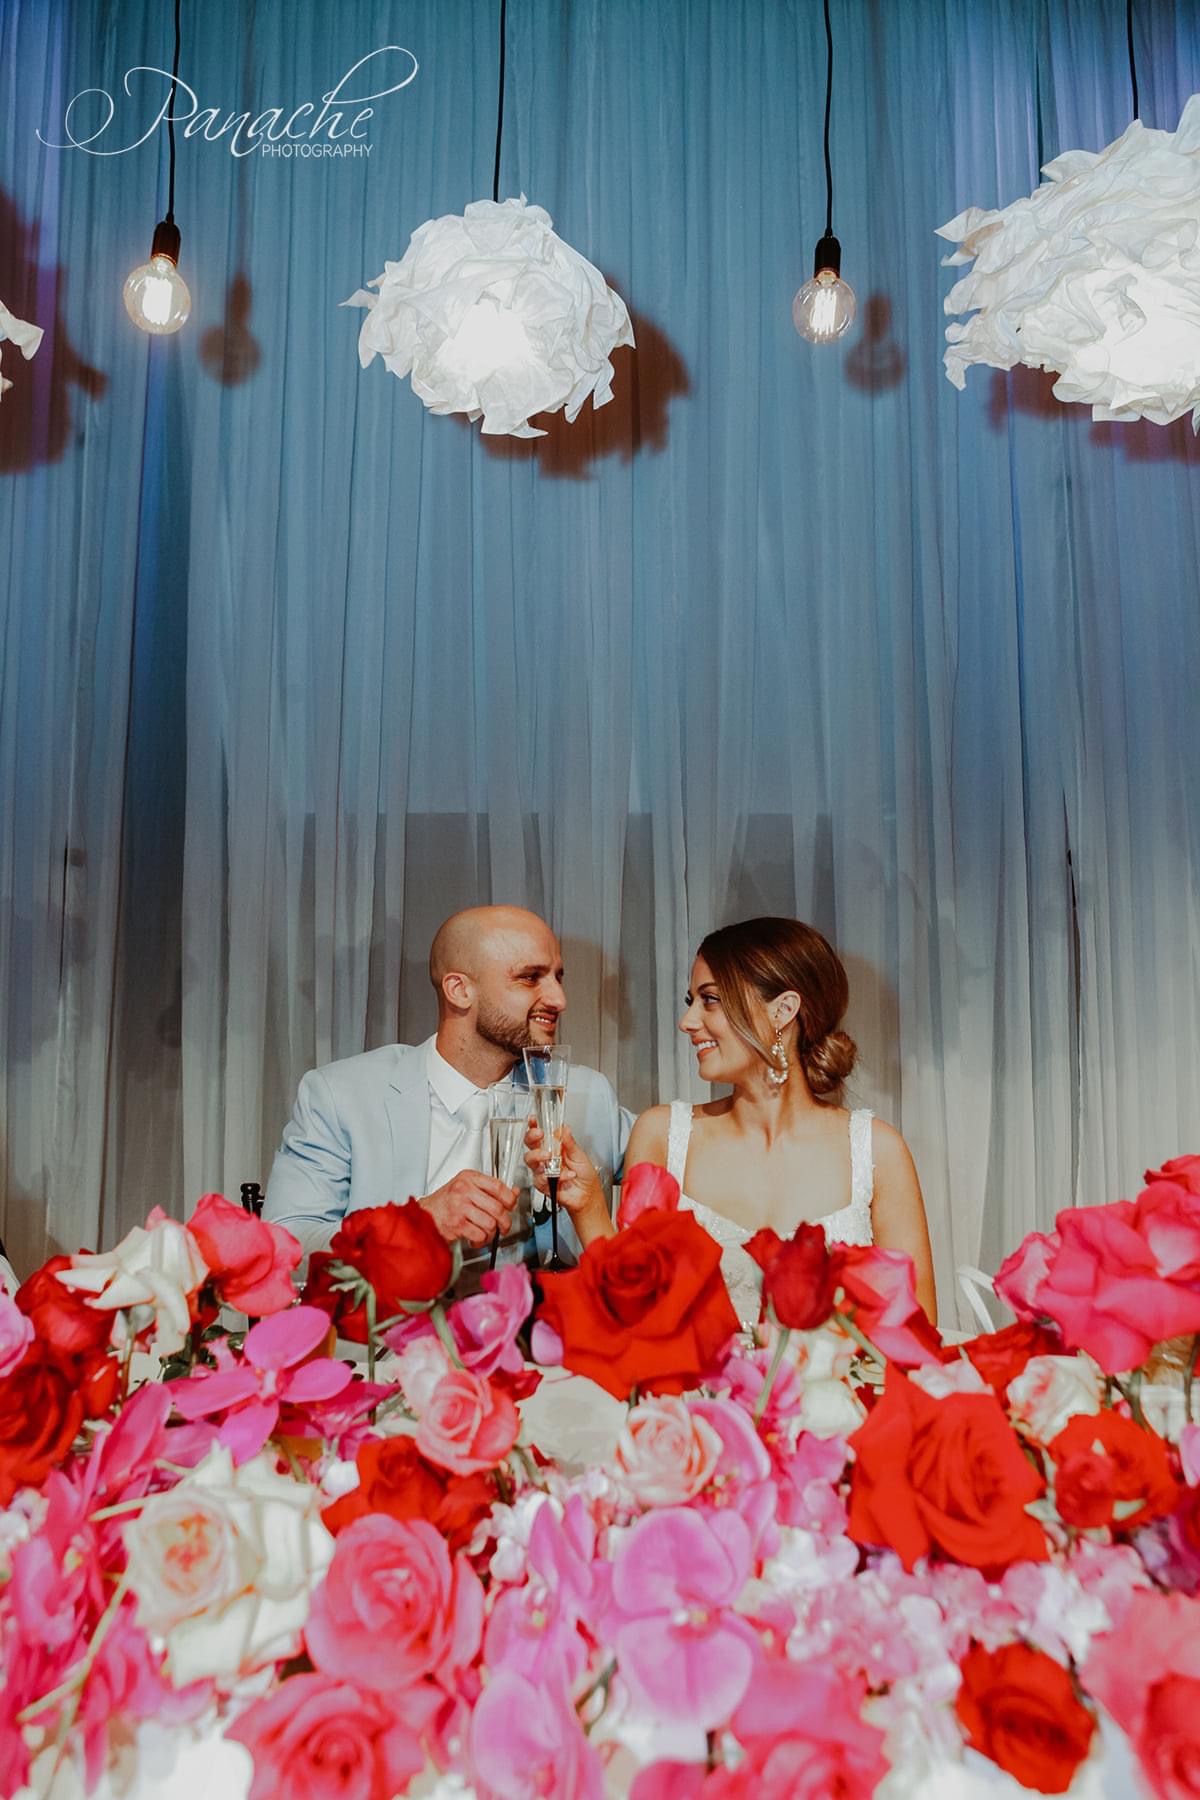 Cristiana and Jake sitting at their reception table. In front of the camera is lots of pink white and red florals.